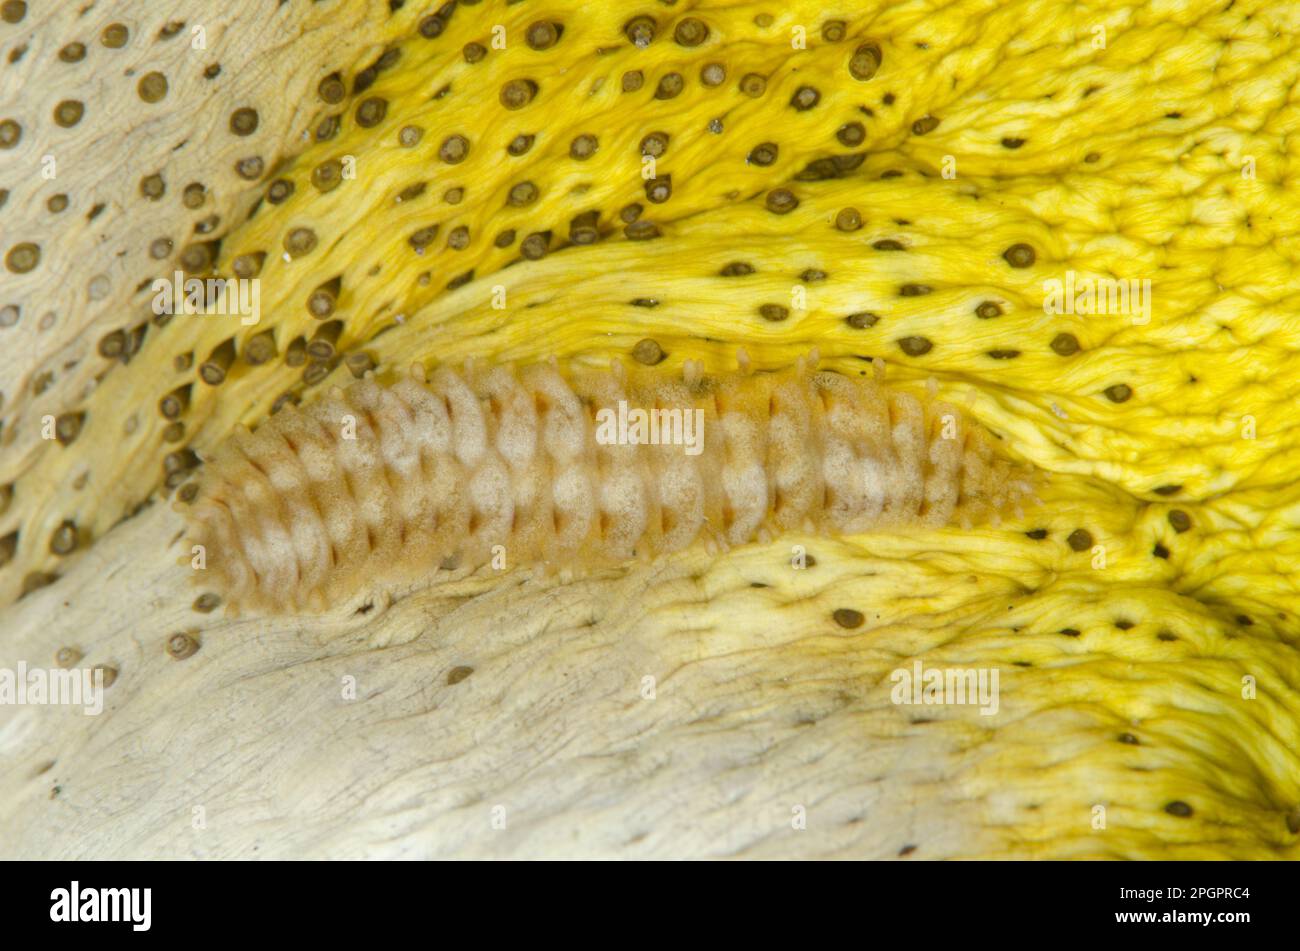 Scale worm (Gastrolepidia clavigera) adult, on the underside of leopard sea cucumber (Bohadschia argus), Aer Perang, Lembeh Strait, Sulawesi, Greater Stock Photo